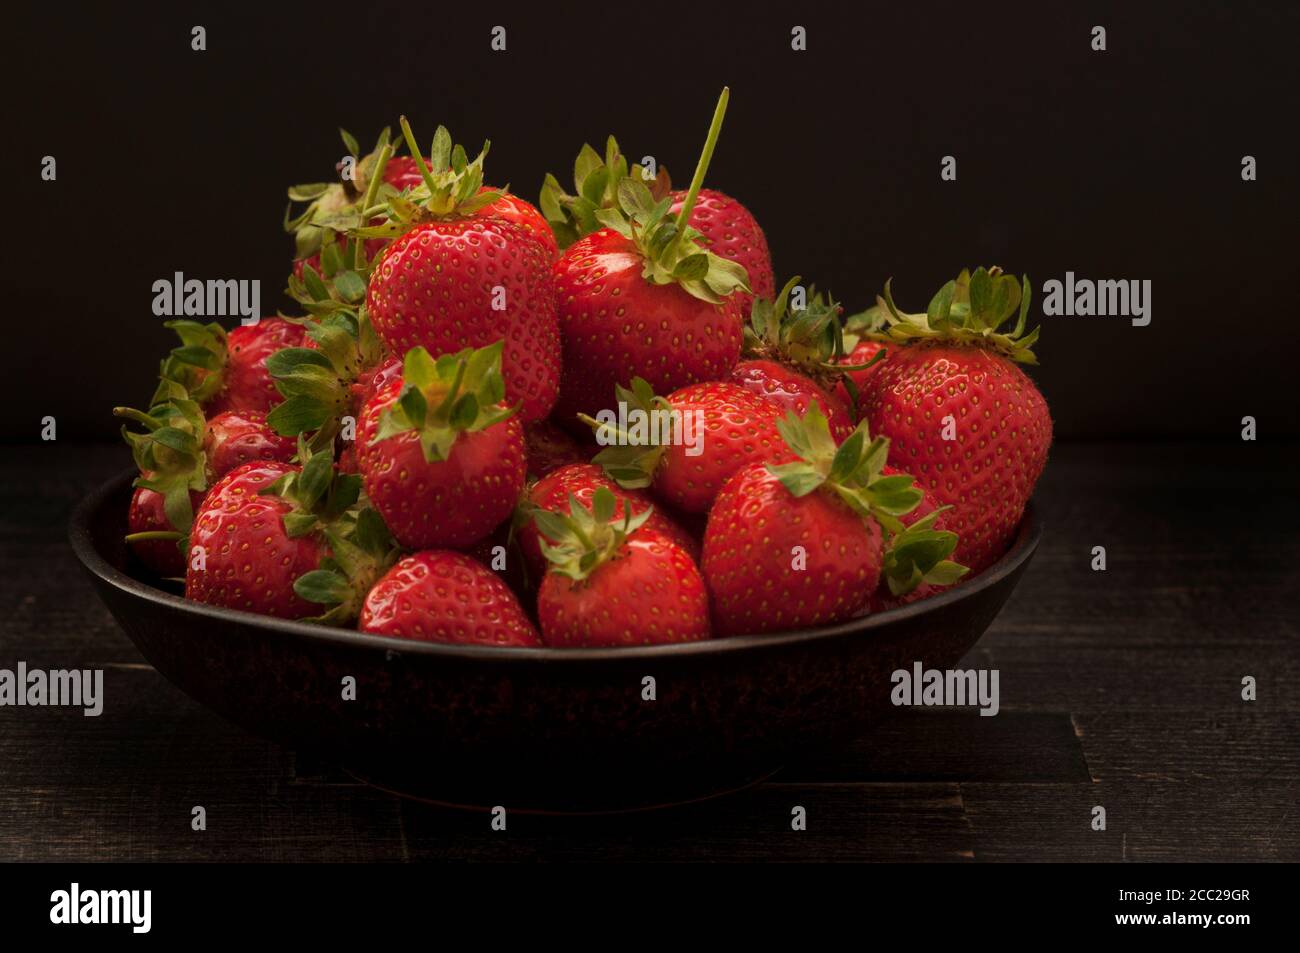 Bowl of strawberries on wooden table, close up Stock Photo